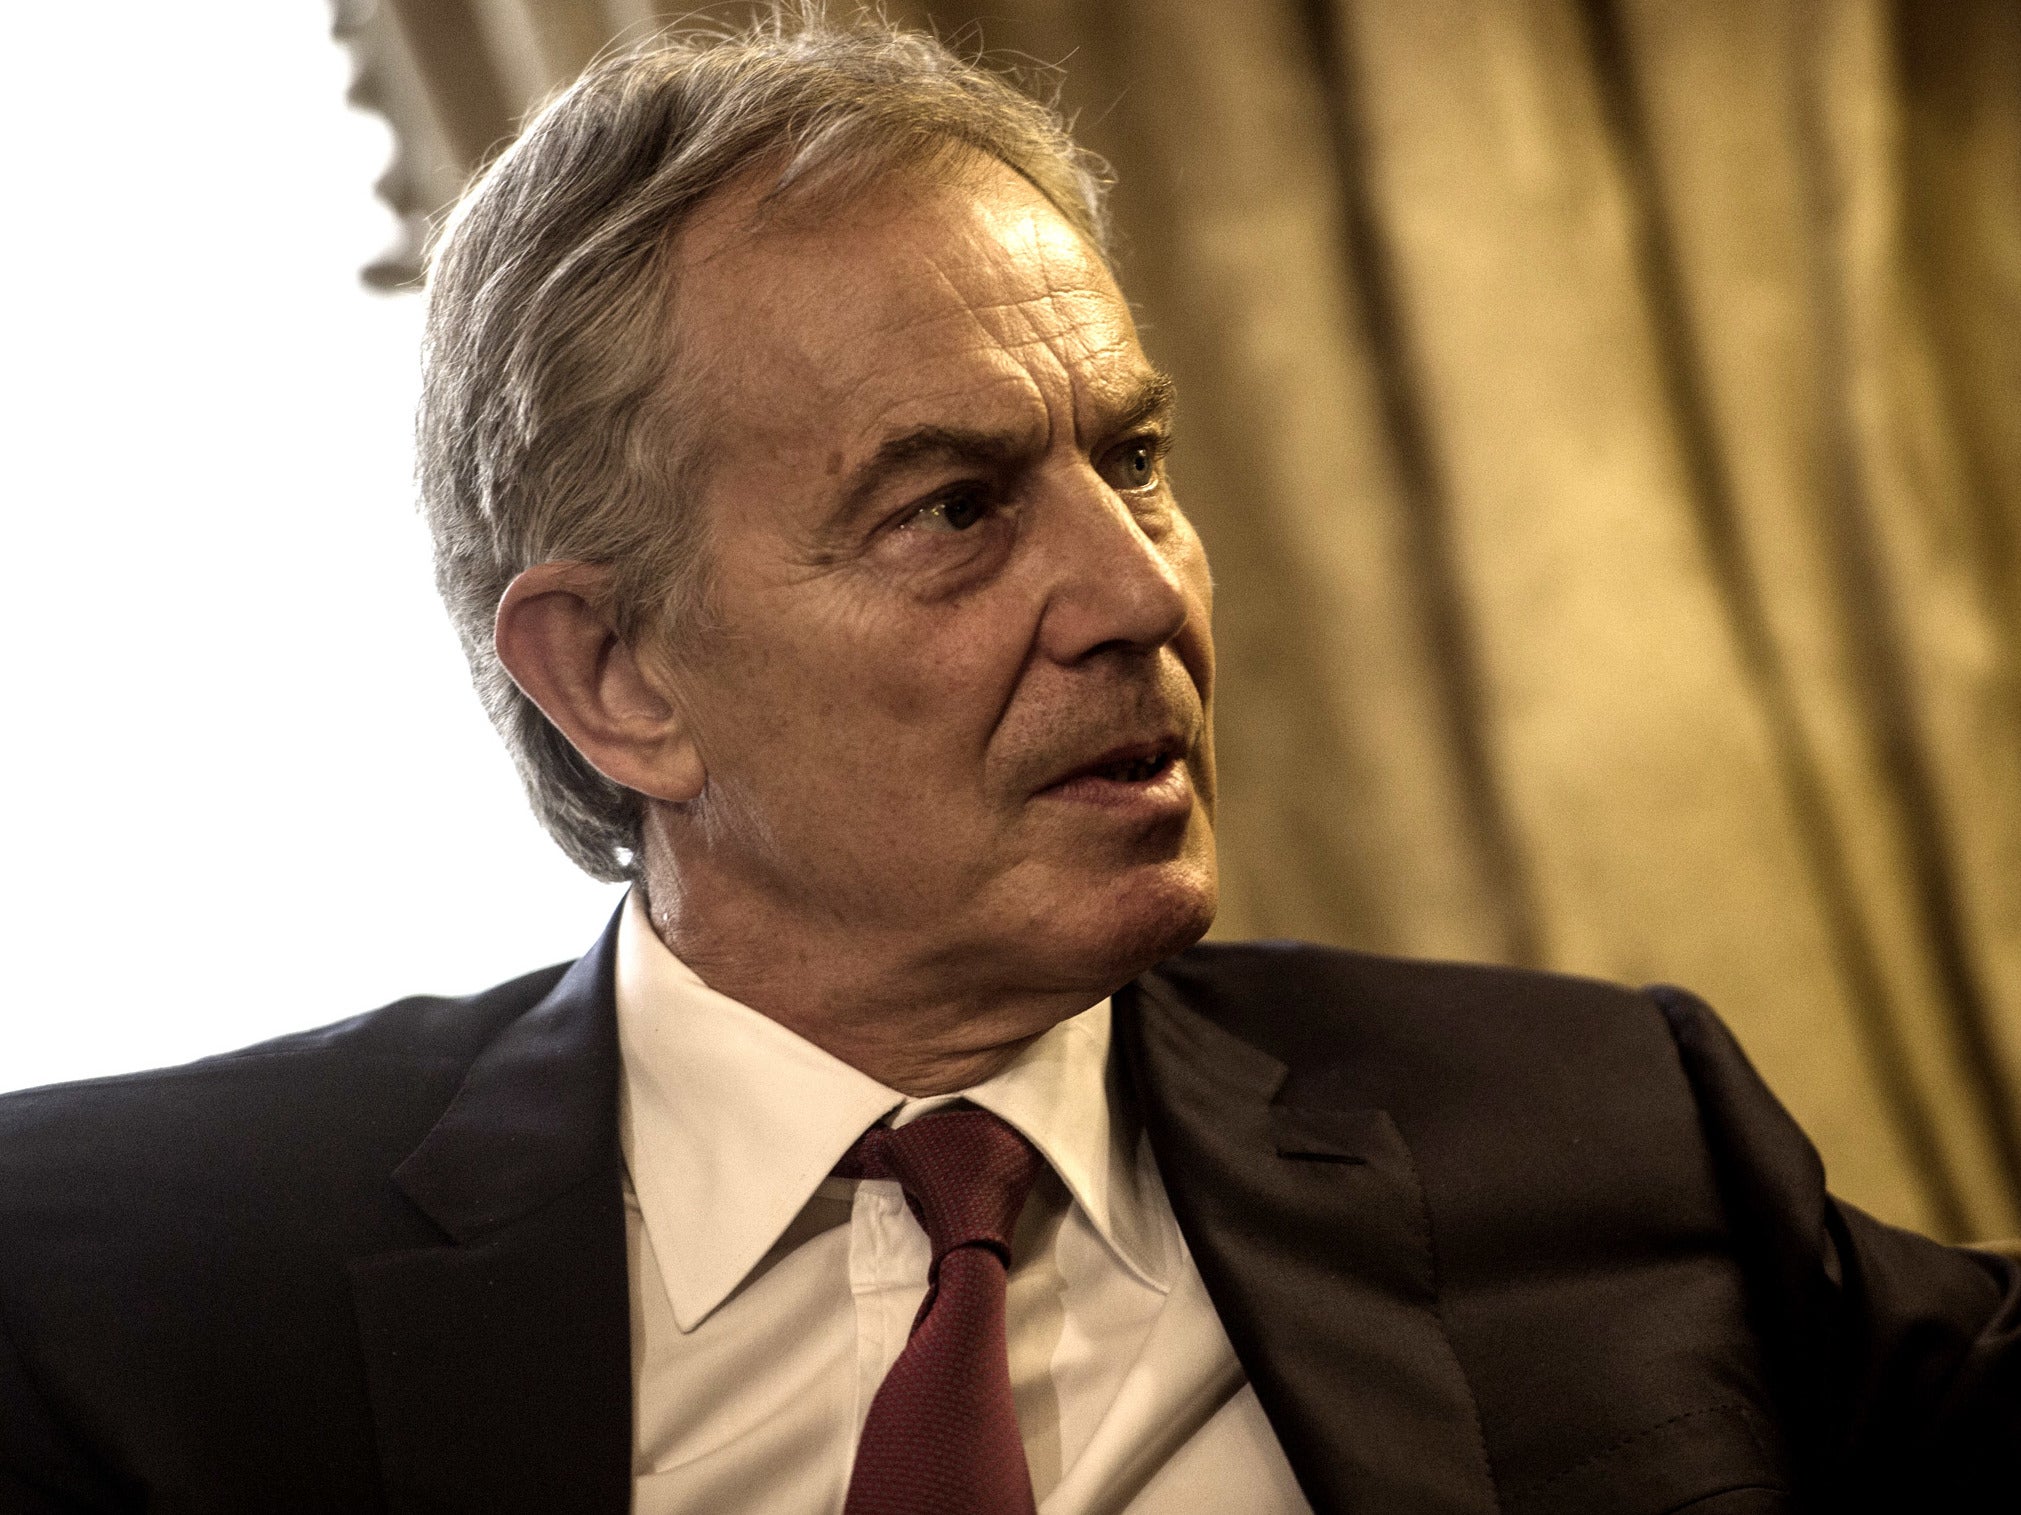 Tony Blair has close ties to the current Egyptian government